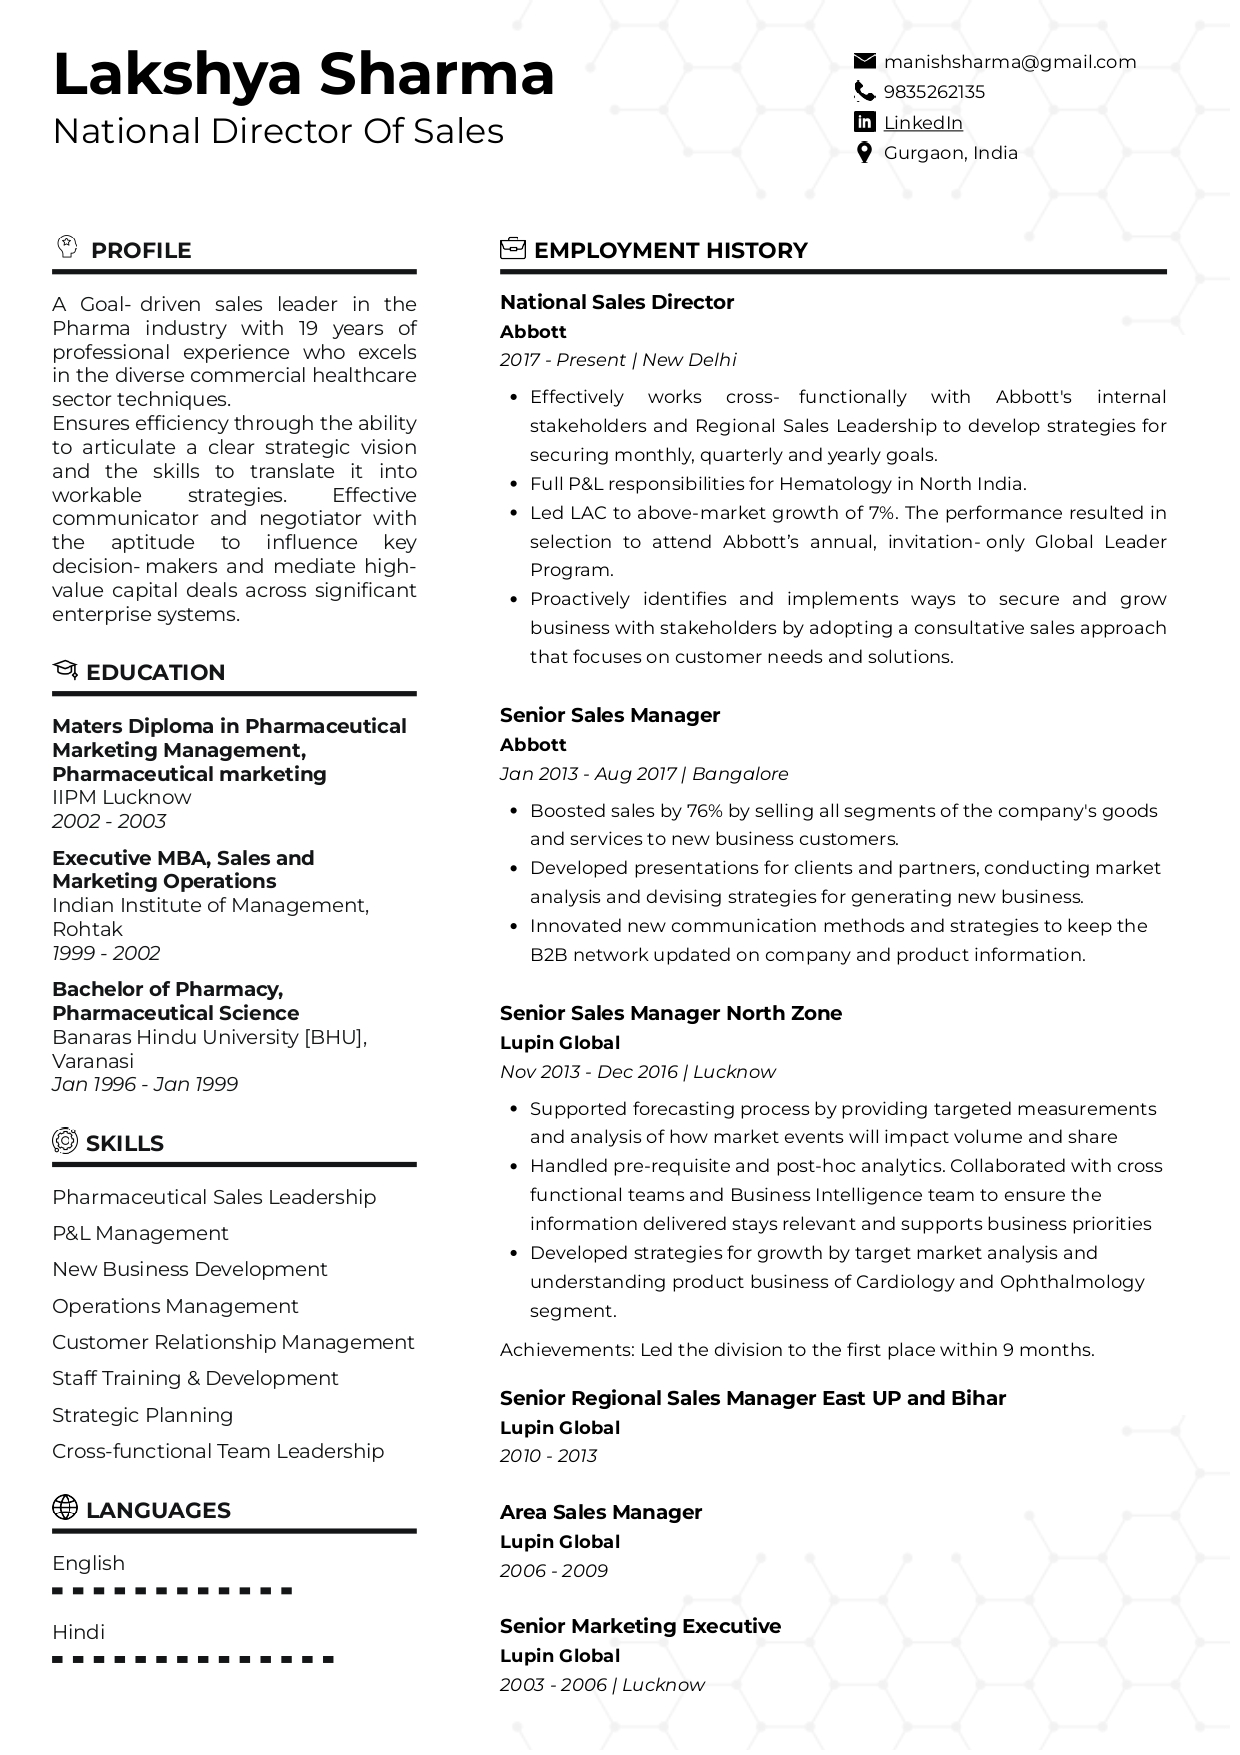 Sample Resume of National Director of Sales | Free Resume Templates & Samples on Resumod.co